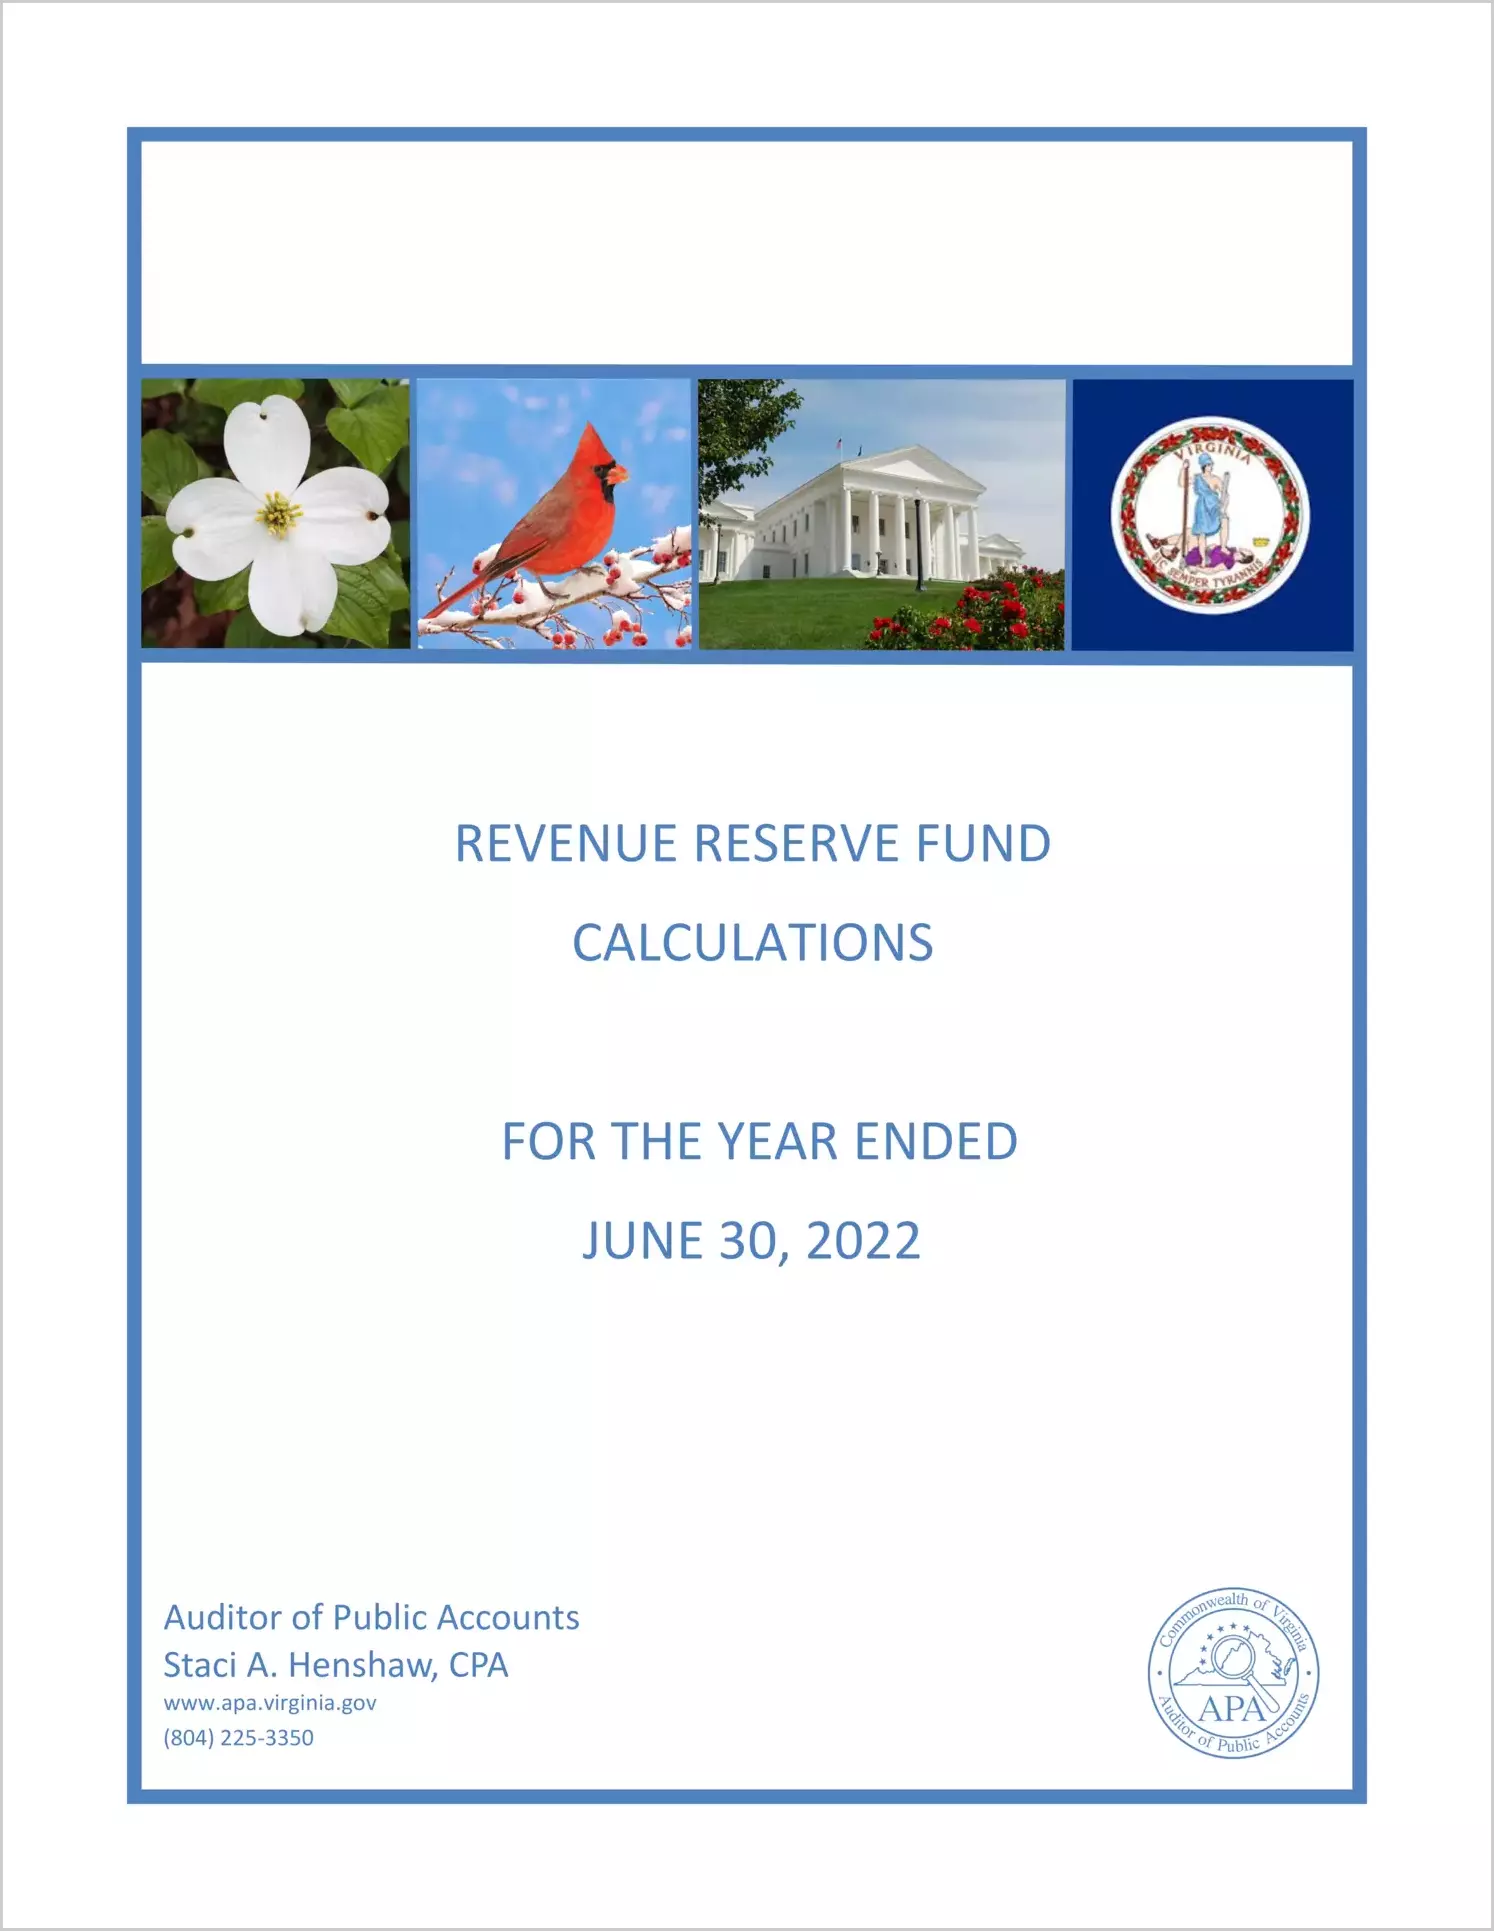 Revenue Reserve Fund Calculations for the year ended June 30, 2022